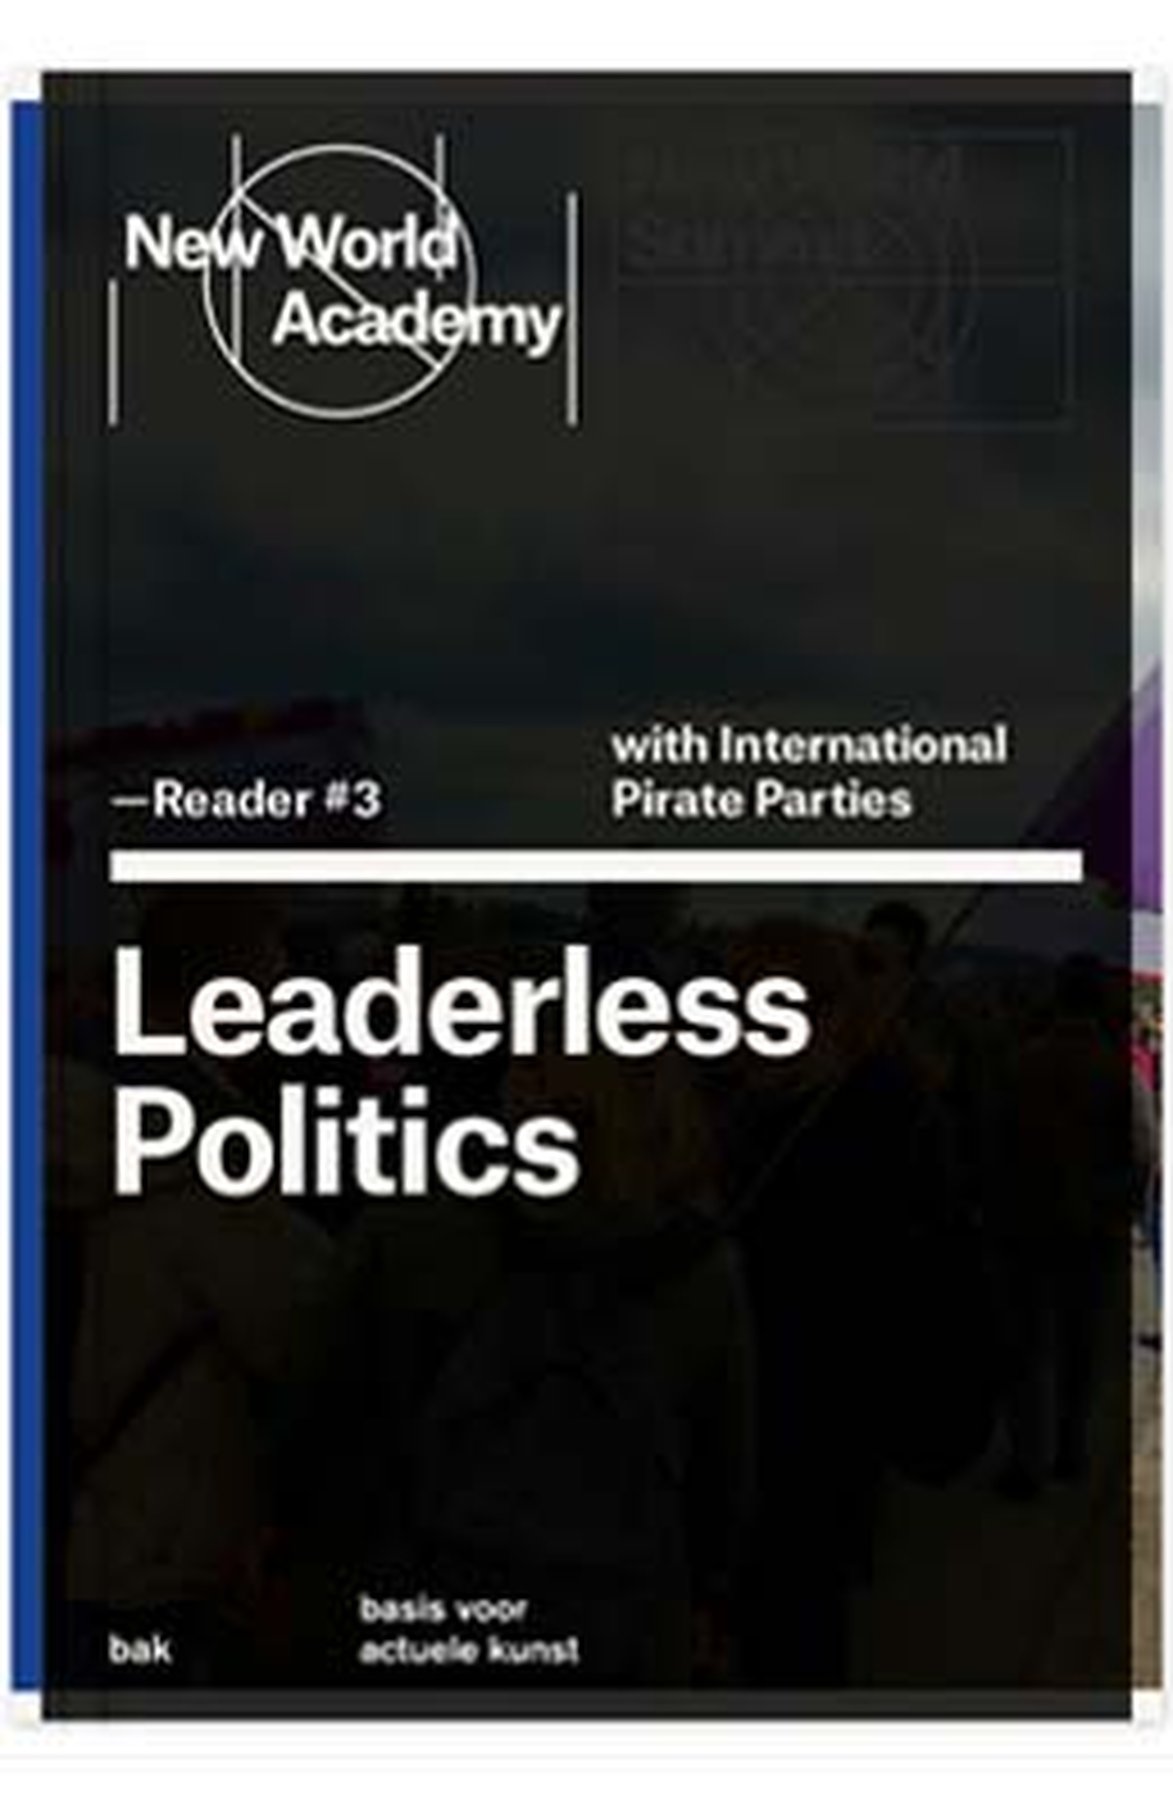 LEADERLESS POLITICS. Selection of texts on the role of art and culture in the history of international Pirate Parties, edited by Dirk Poot and Jonas Staal. BAK, basis voor actuele kunst, Utrecht, 2013